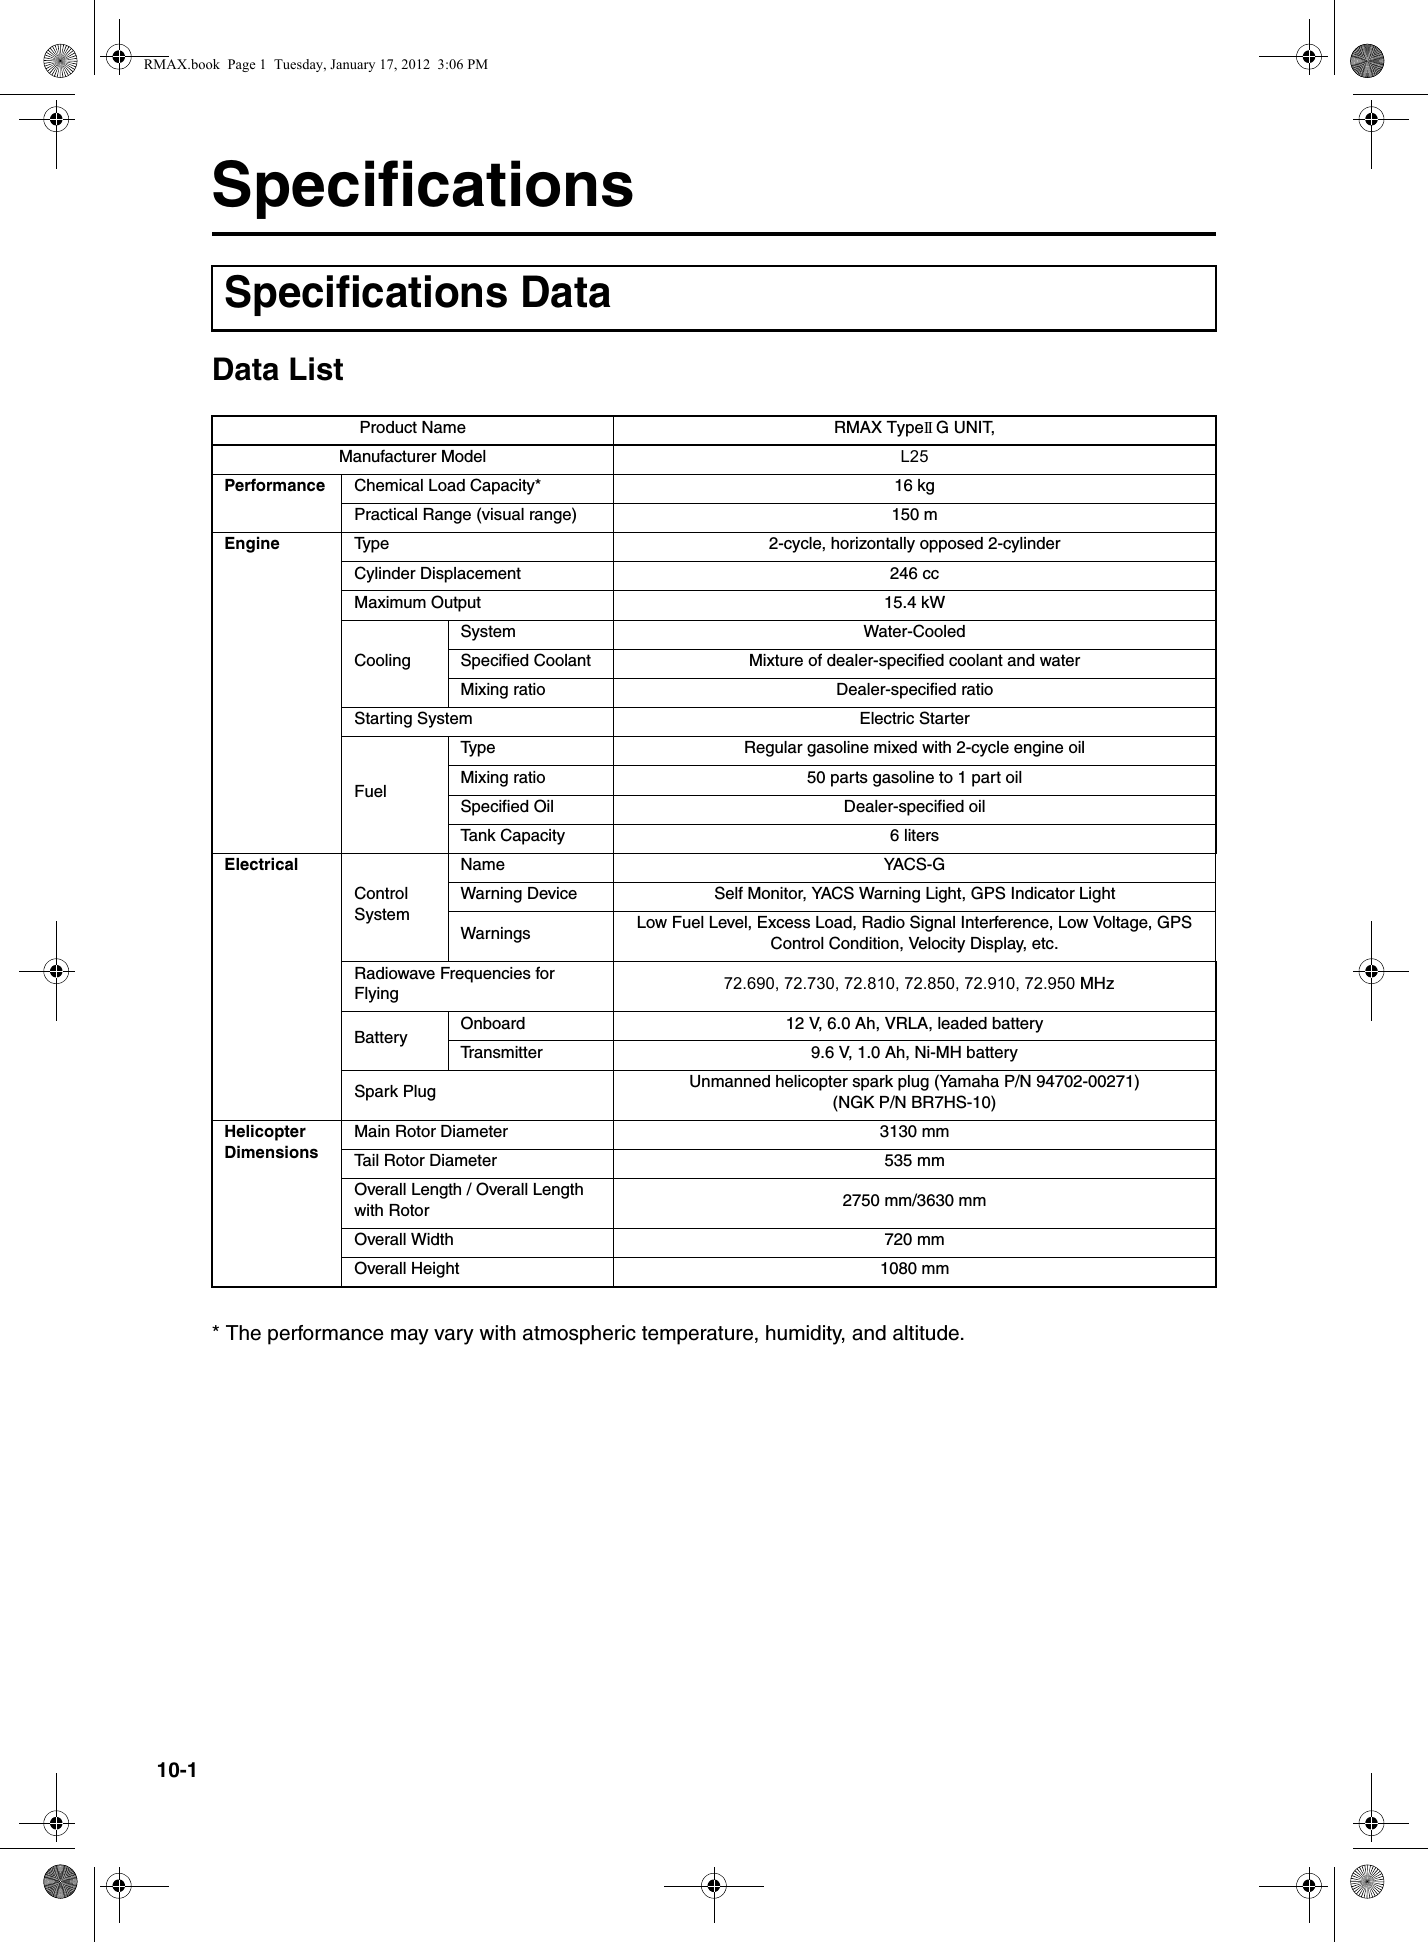 10-1SpecificationsData List* The performance may vary with atmospheric temperature, humidity, and altitude.Specifications DataProduct Name RMAX TypeII G UNIT,Manufacturer Model L25Performance Chemical Load Capacity* 16 kgPractical Range (visual range) 150 mEngine Type 2-cycle, horizontally opposed 2-cylinderCylinder Displacement 246 ccMaximum Output 15.4 kWCoolingSystem Water-CooledSpecified Coolant Mixture of dealer-specified coolant and waterMixing ratio Dealer-specified ratioStarting System Electric StarterFuelType Regular gasoline mixed with 2-cycle engine oilMixing ratio 50 parts gasoline to 1 part oilSpecified Oil Dealer-specified oilTank Capacity 6 litersElectricalControl SystemName YACS-GWarning Device Self Monitor, YACS Warning Light, GPS Indicator LightWarnings Low Fuel Level, Excess Load, Radio Signal Interference, Low Voltage, GPS Control Condition, Velocity Display, etc.Radiowave Frequencies for Flying  72.690, 72.730, 72.810, 72.850, 72.910, 72.950 MHzBattery Onboard 12 V, 6.0 Ah, VRLA, leaded batteryTransmitter 9.6 V, 1.0 Ah, Ni-MH batterySpark Plug Unmanned helicopter spark plug (Yamaha P/N 94702-00271) (NGK P/N BR7HS-10)Helicopter DimensionsMain Rotor Diameter 3130 mmTail Rotor Diameter 535 mmOverall Length / Overall Length with Rotor 2750 mm/3630 mmOverall Width 720 mmOverall Height 1080 mmRMAX.book  Page 1  Tuesday, January 17, 2012  3:06 PM